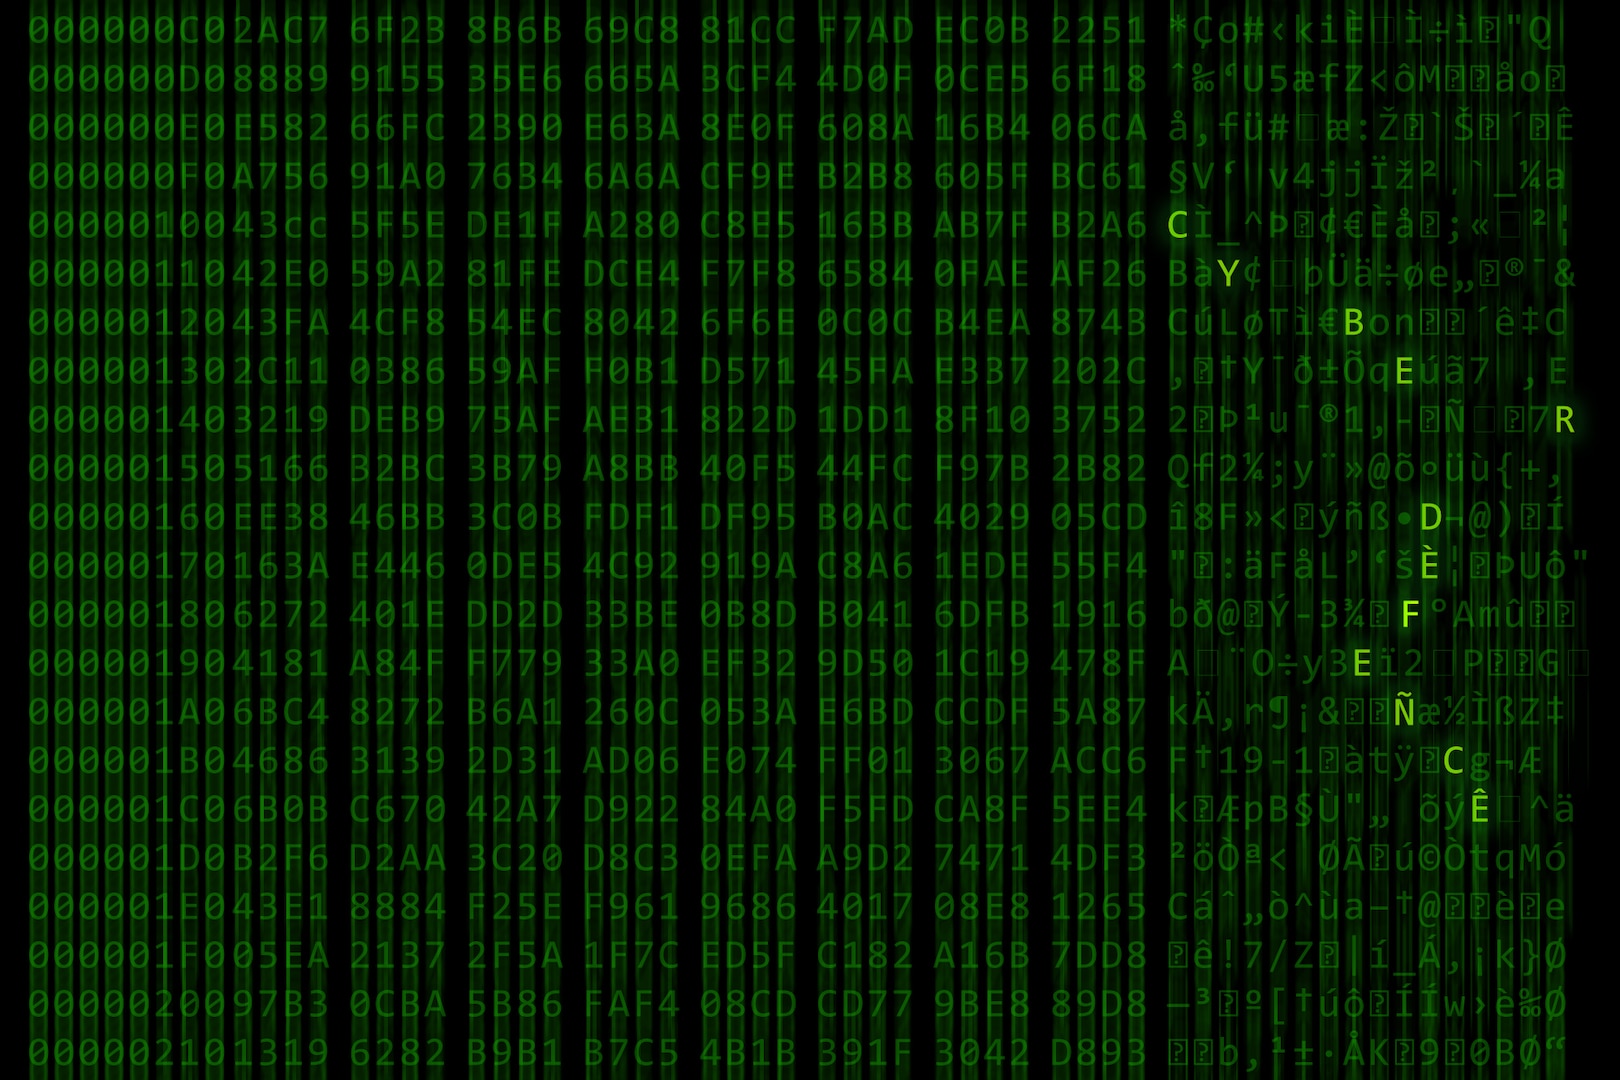 Green letters scroll on a computer screen, leaving a blur.  The letters "C Y B E R F L A G 19-1" are in bold.